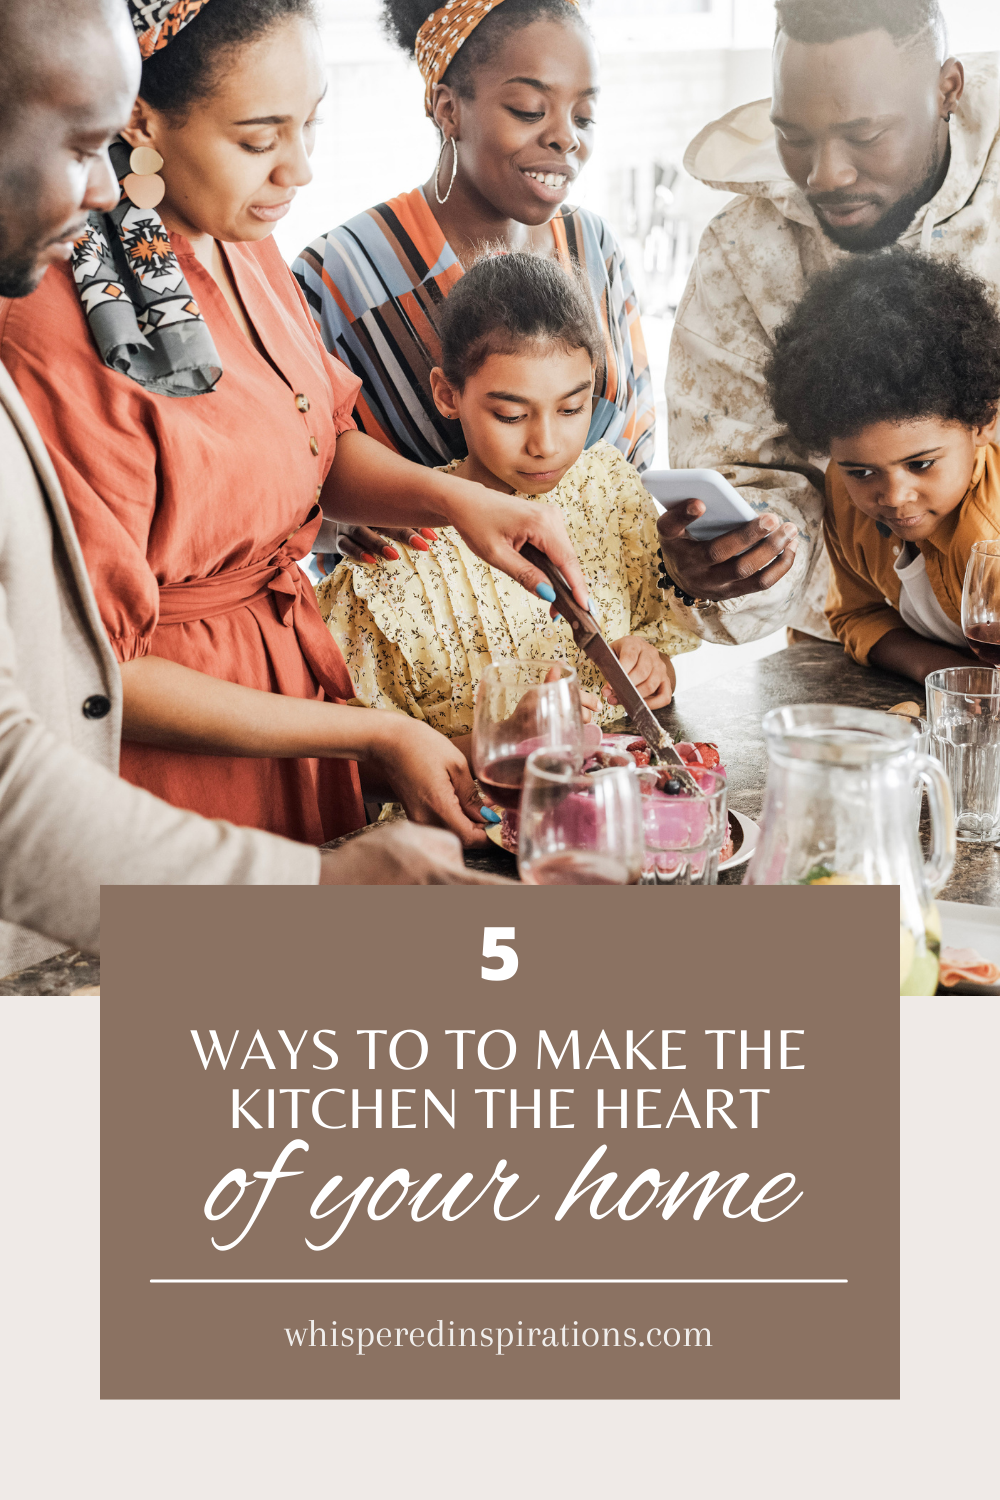 A family gathers around the kitchen cutting a cake. They are huddled around smiling and taking pictures. This article covers how to make the kitchen the heart of your home.